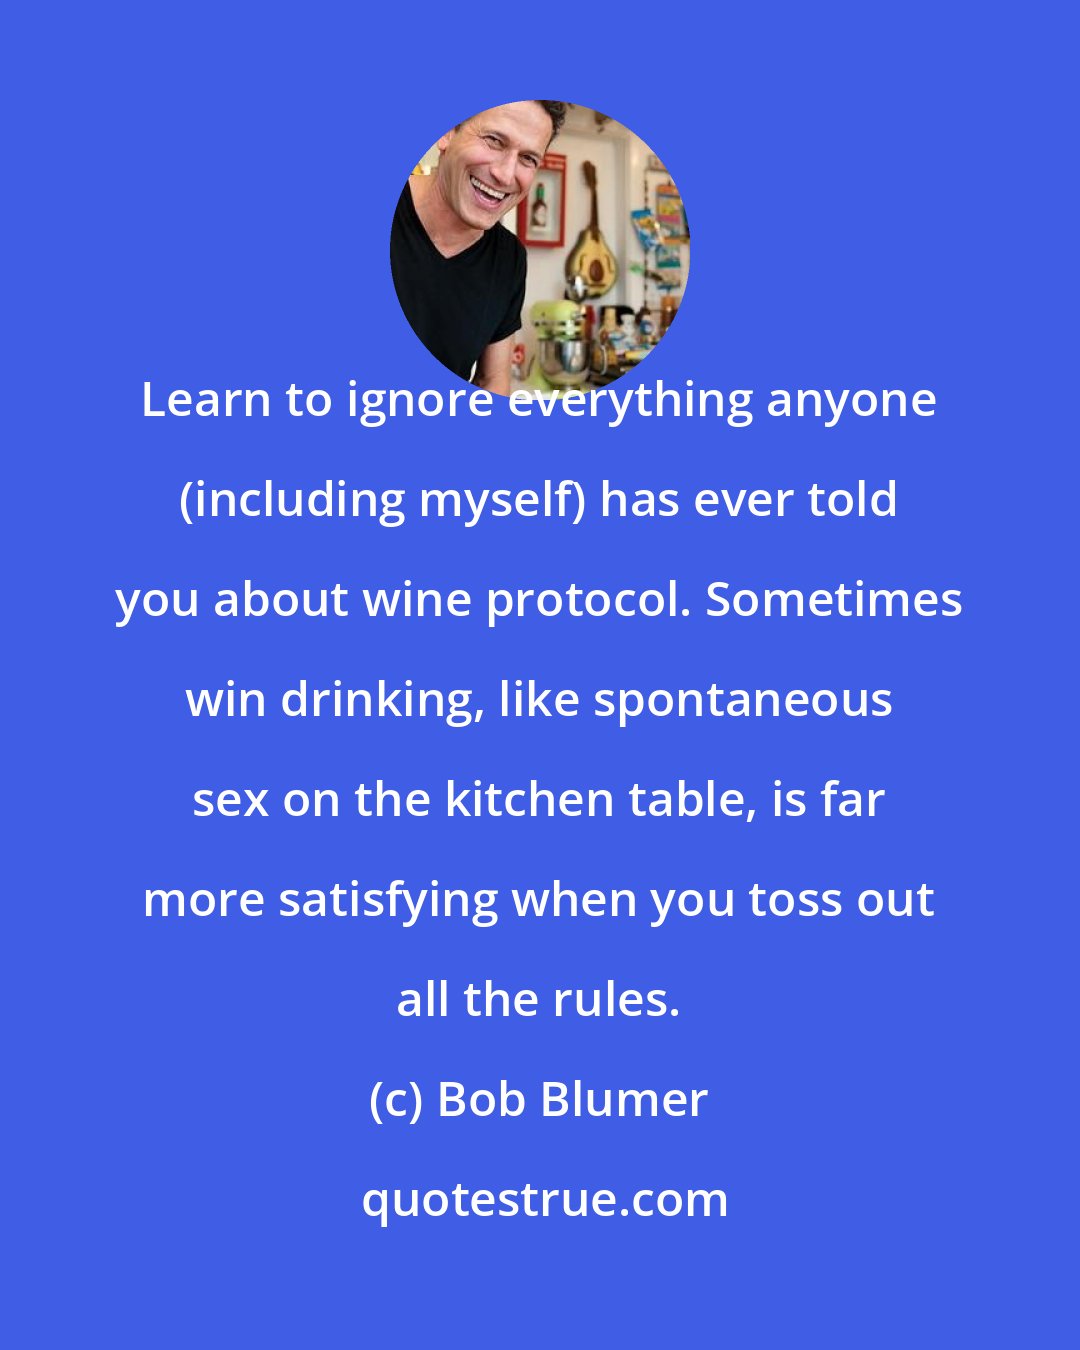 Bob Blumer: Learn to ignore everything anyone (including myself) has ever told you about wine protocol. Sometimes win drinking, like spontaneous sex on the kitchen table, is far more satisfying when you toss out all the rules.